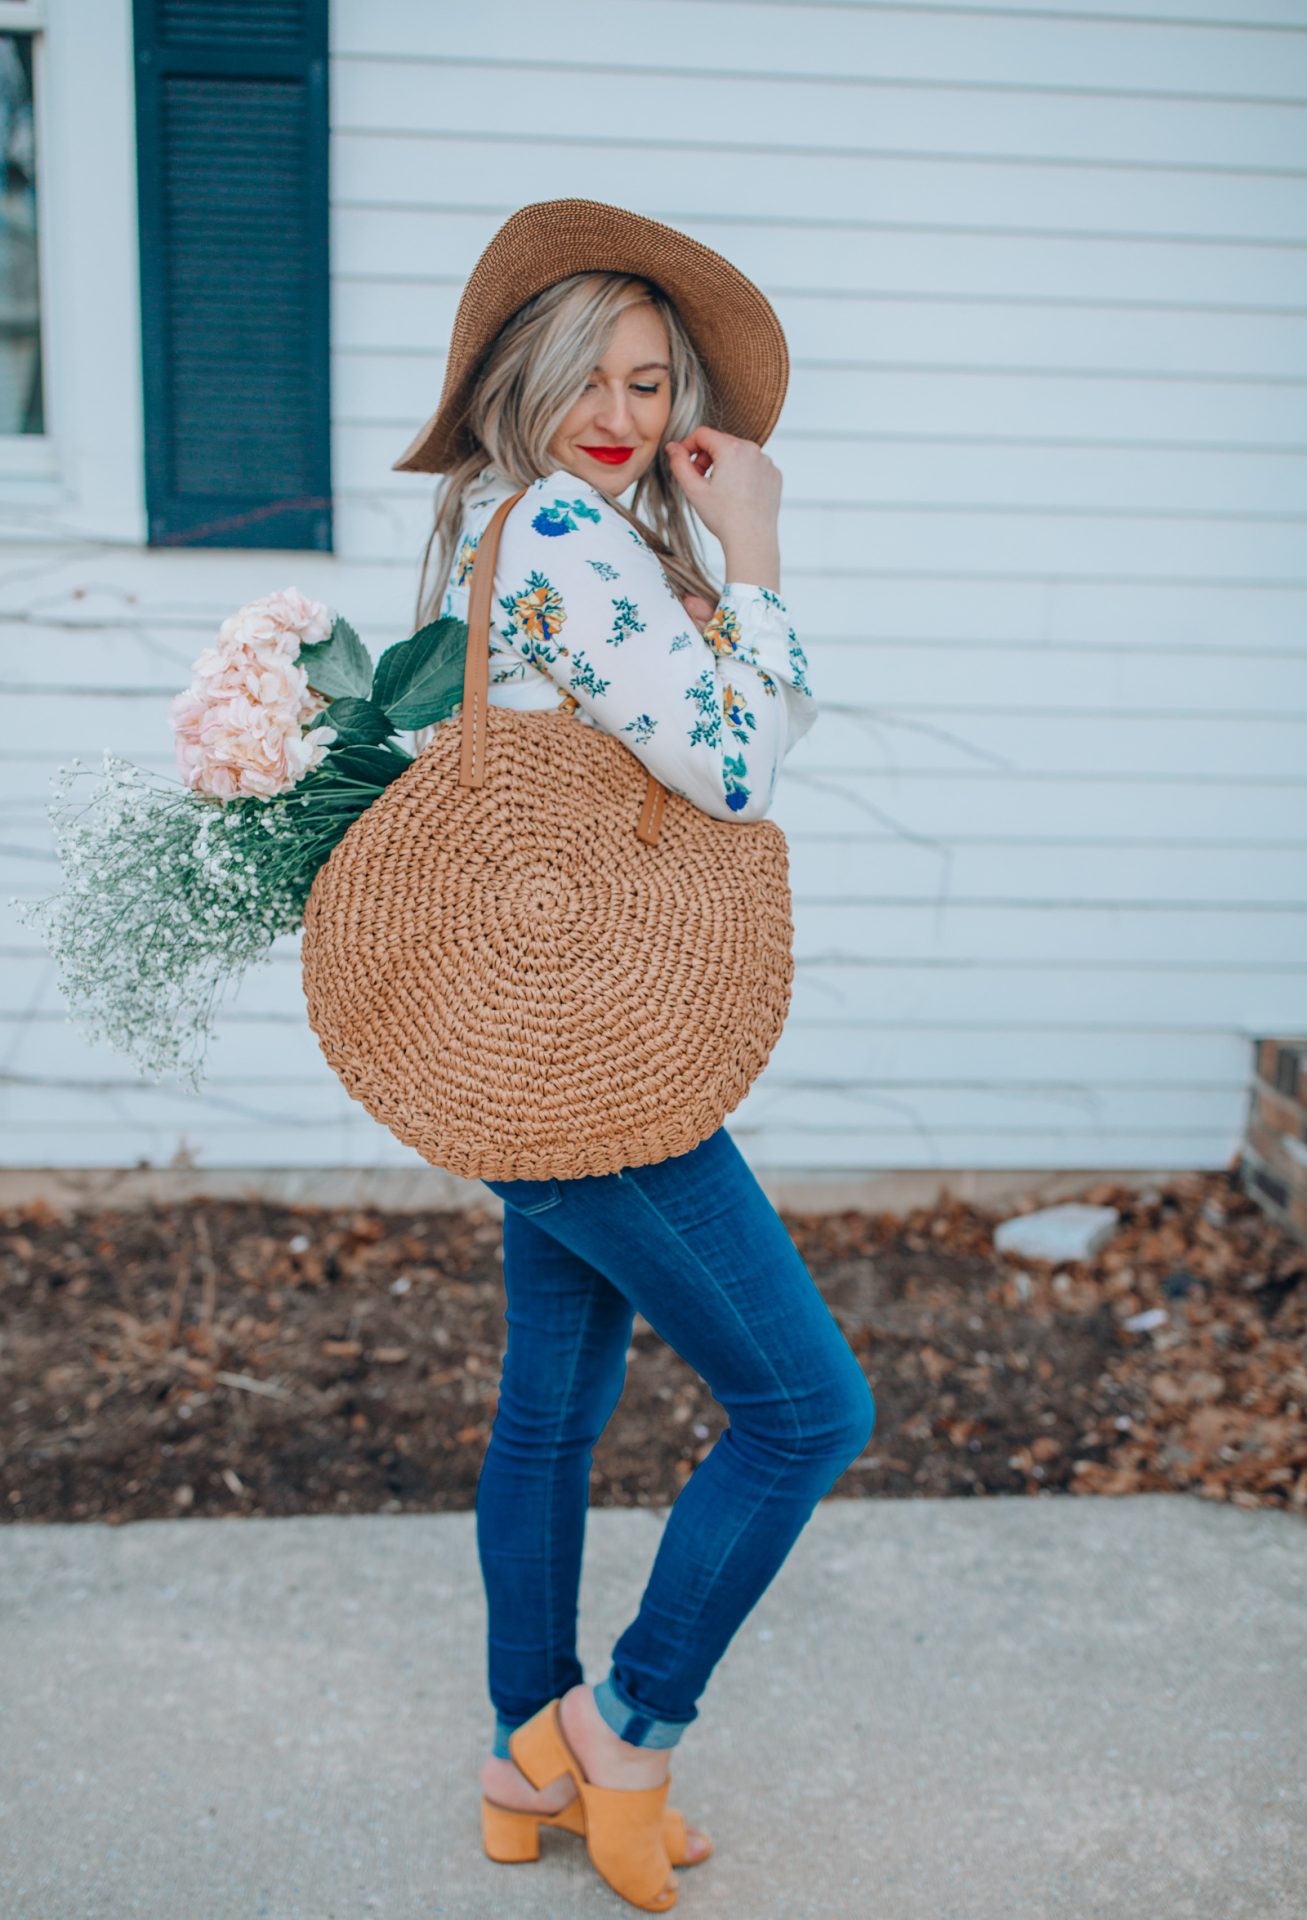 Chicago fashion blogger Happily Inspired is sharing the best straw bags under $100! Straw bags are a seasonal staple & effortless to take from day to night!